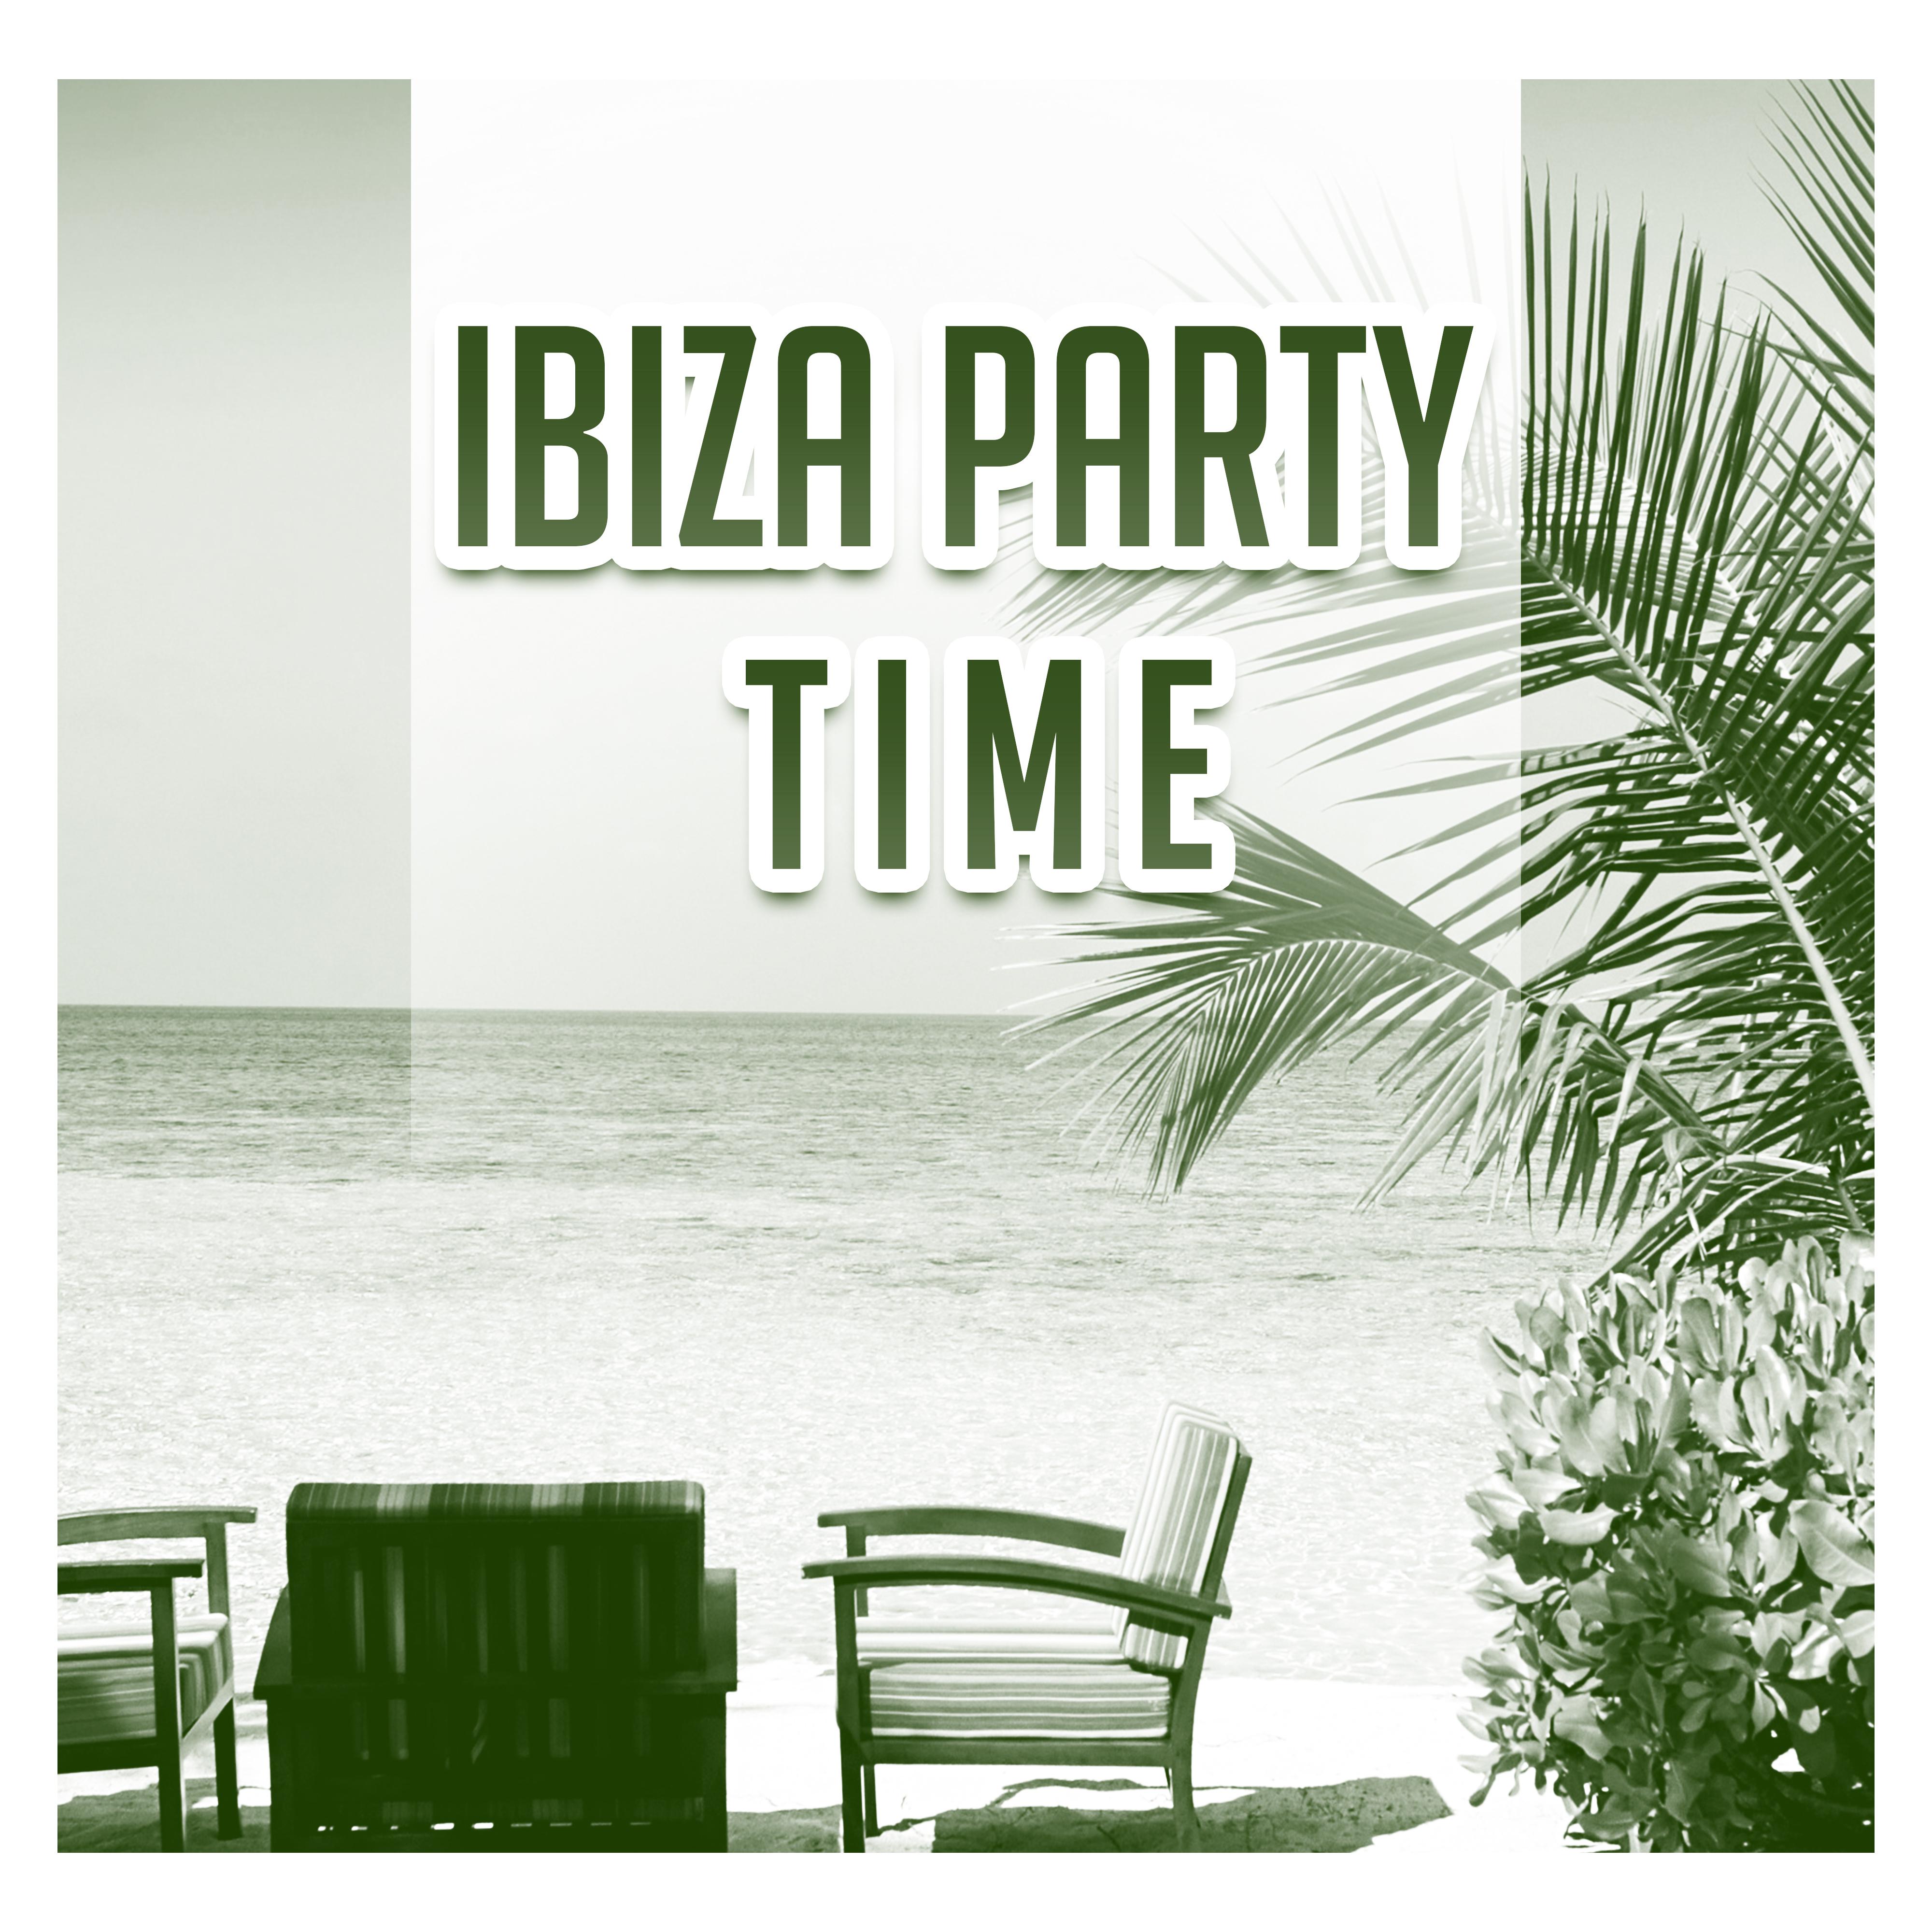 Ibiza Party Time – Ibiza Beach Party, Sounds to Have Fun, Summer Vibes, Chill Out All Night